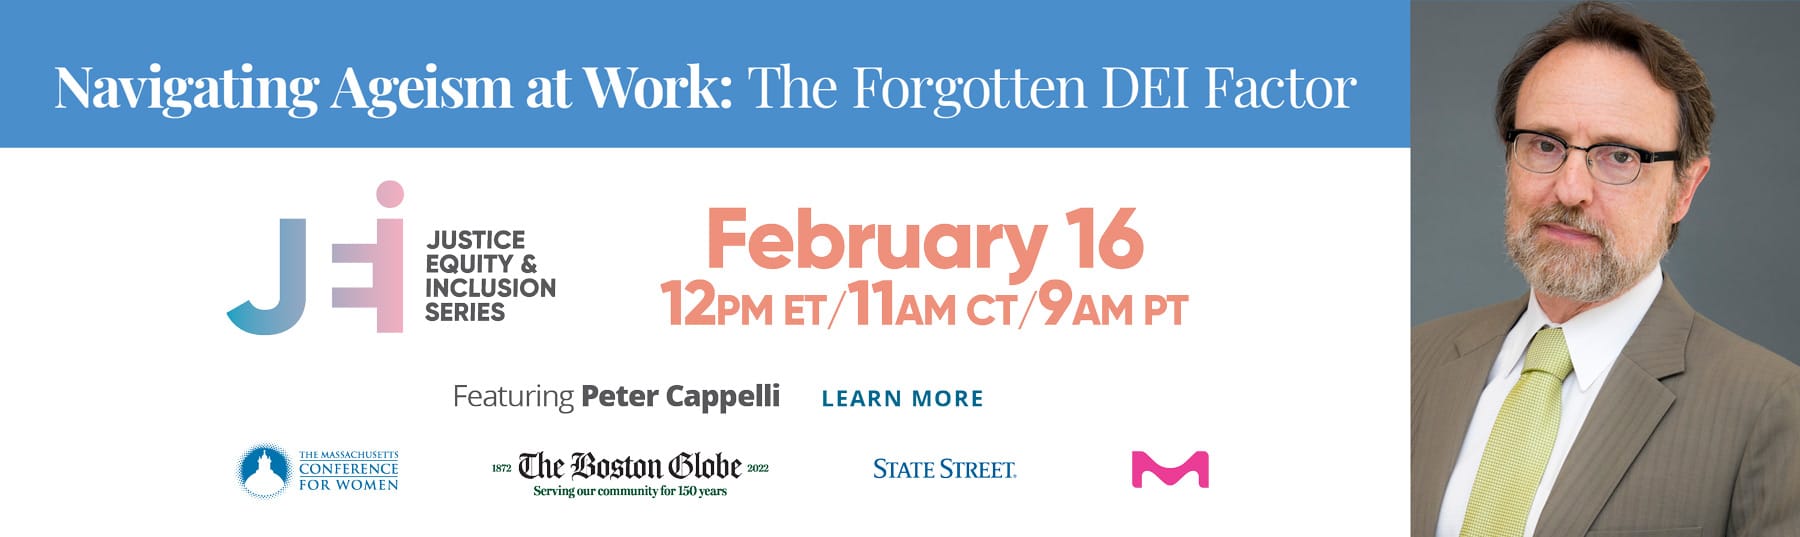 Navigating Ageism at Work: The Forgotten DEI Factor featuring Peter Cappelli and Nicole D. Smith